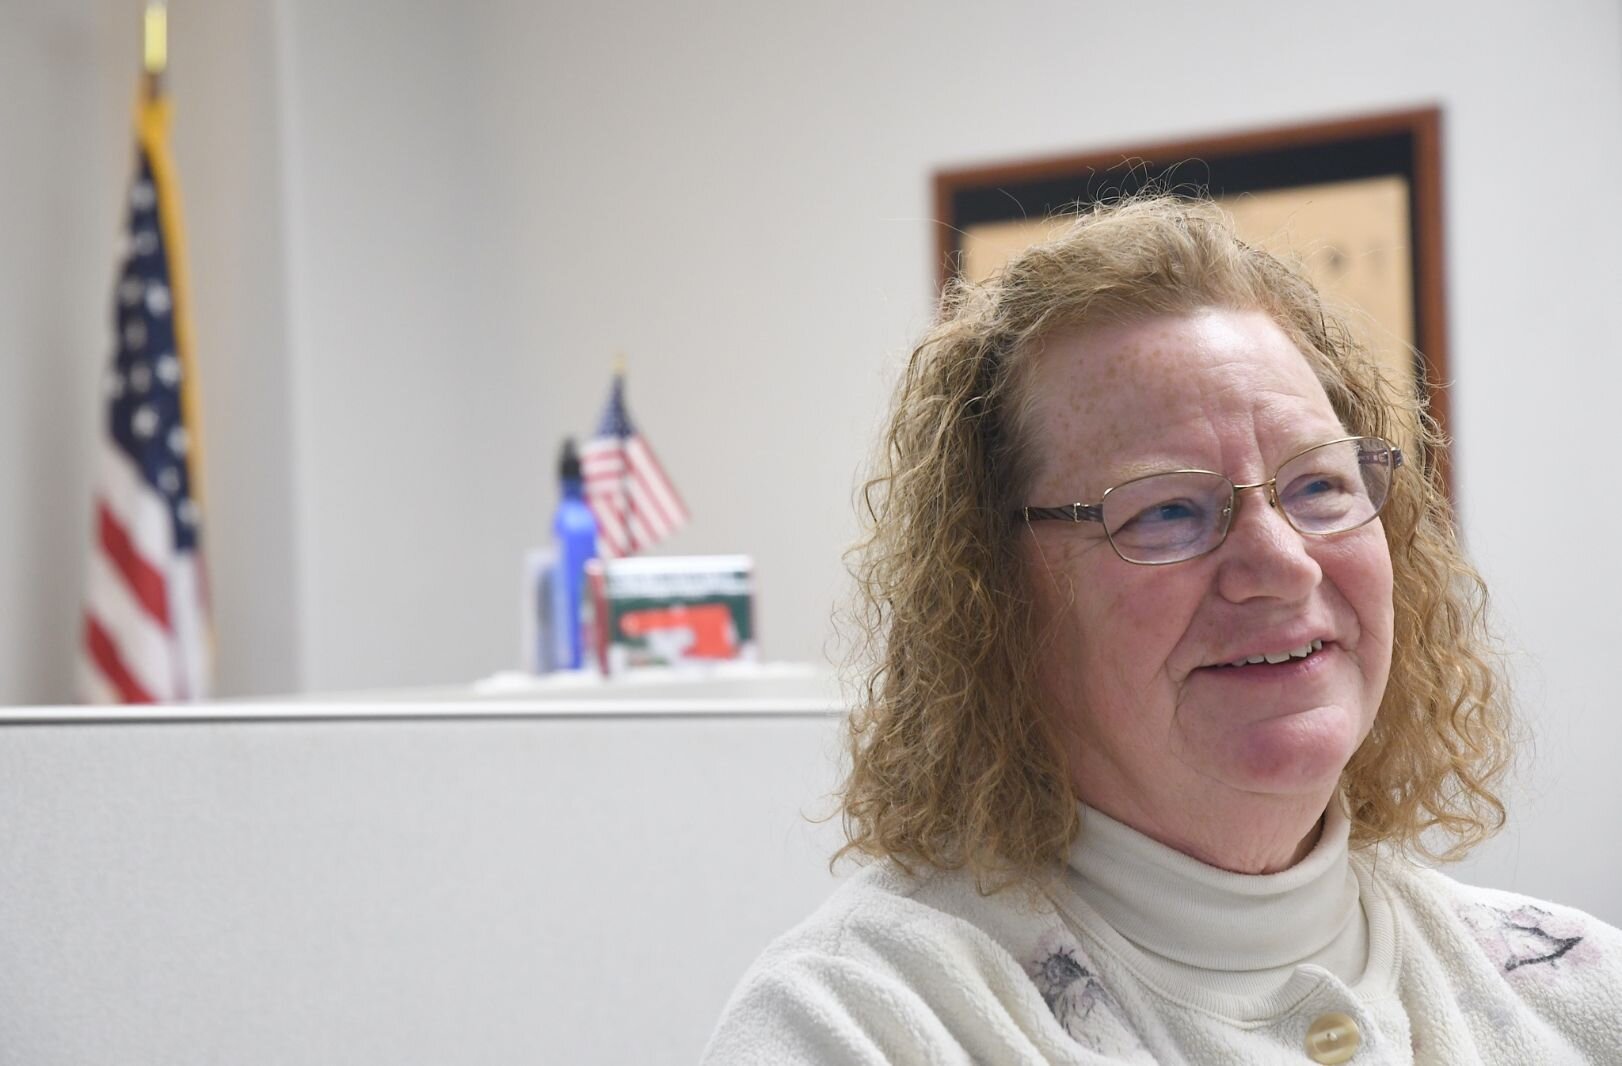 Teri Loew is retiring after a 30-year as Chief Deputy Clerk of Elections for Calhoun County.